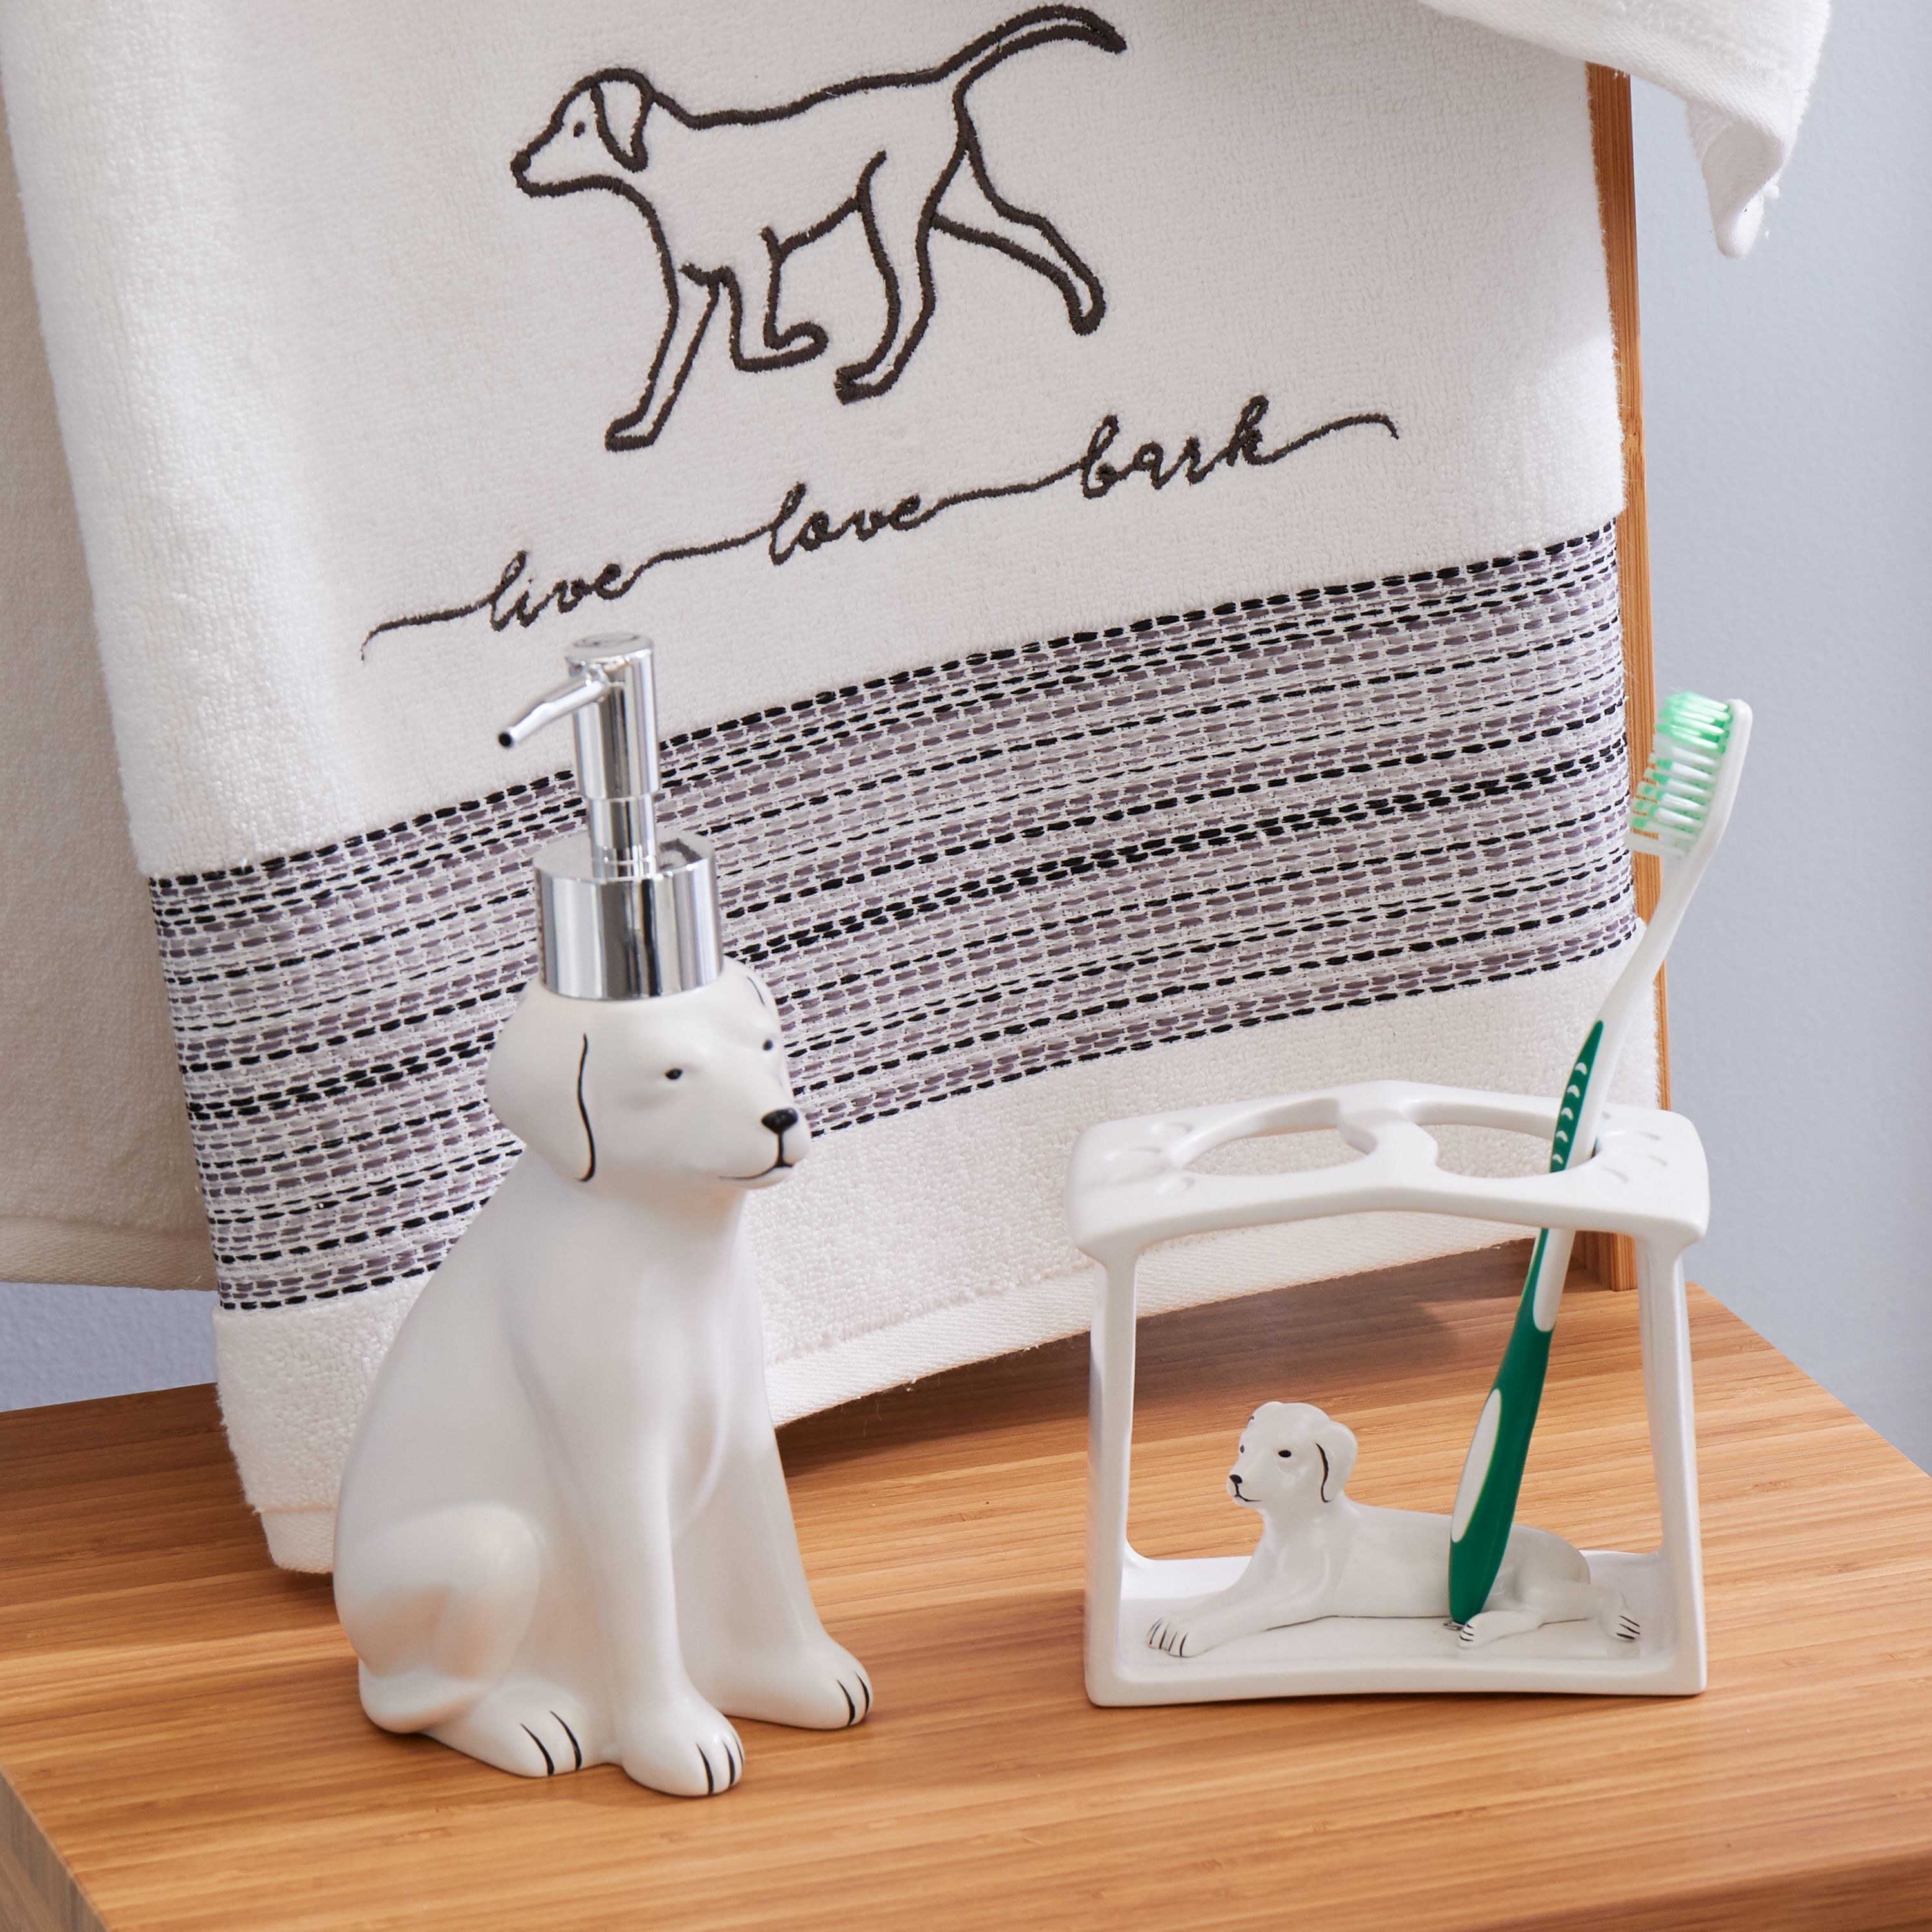 A soap dispenser in the shape of a white dog next to a toothbrush holder